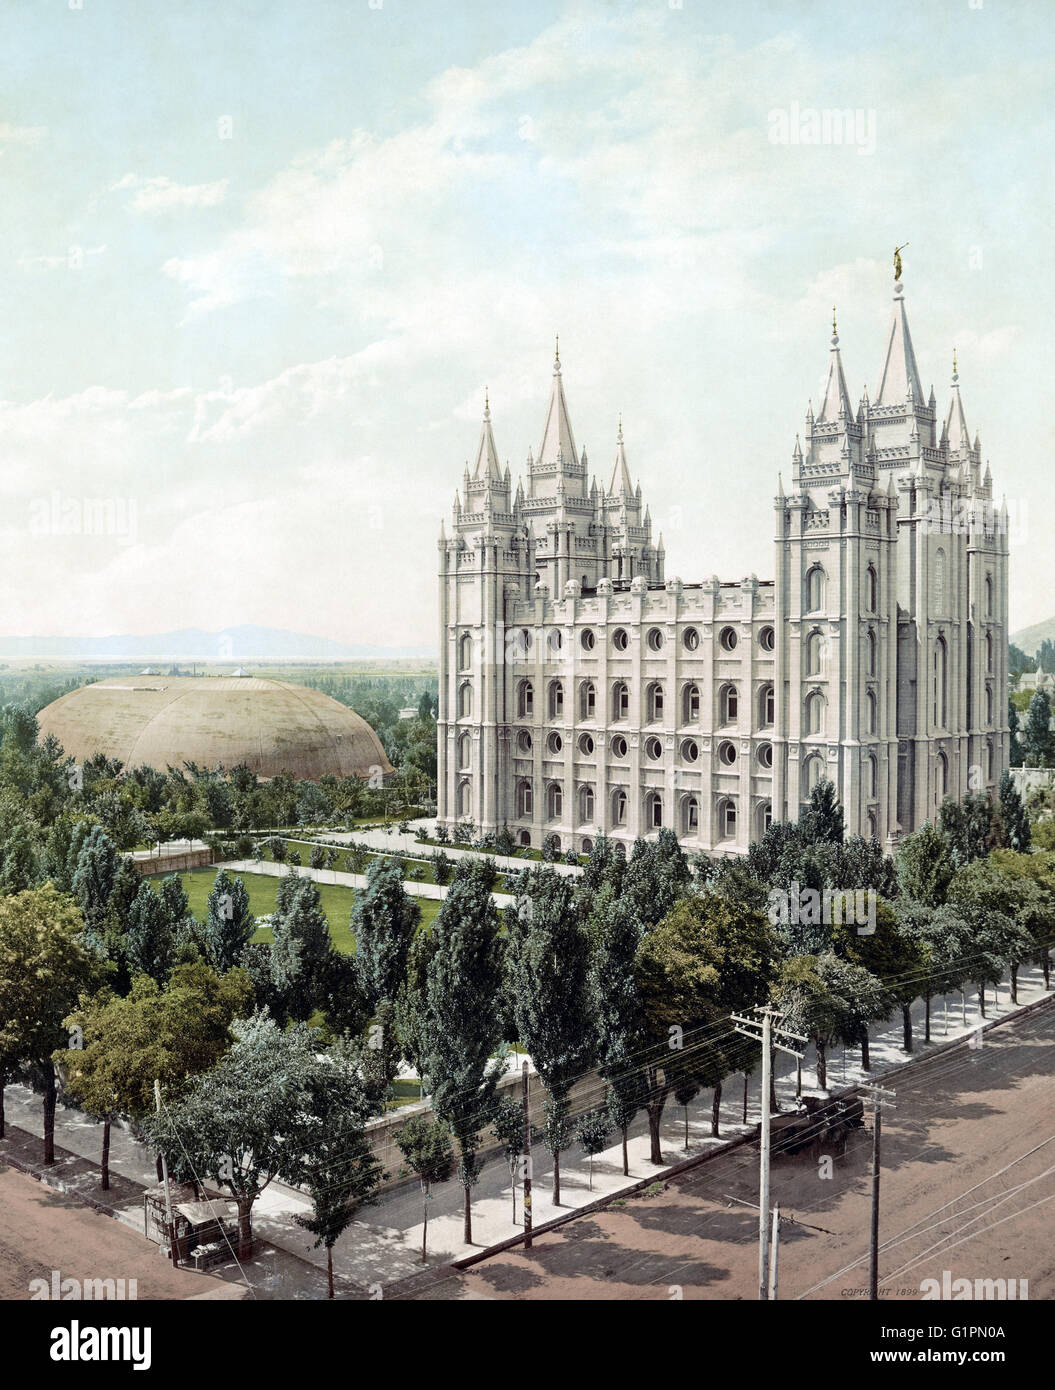 SALT LAKE CITY, c1899.   Temple Square in Salt Lake City, Utah. Photochrome from a photograph by William Henry Jackson, c1899. Stock Photo